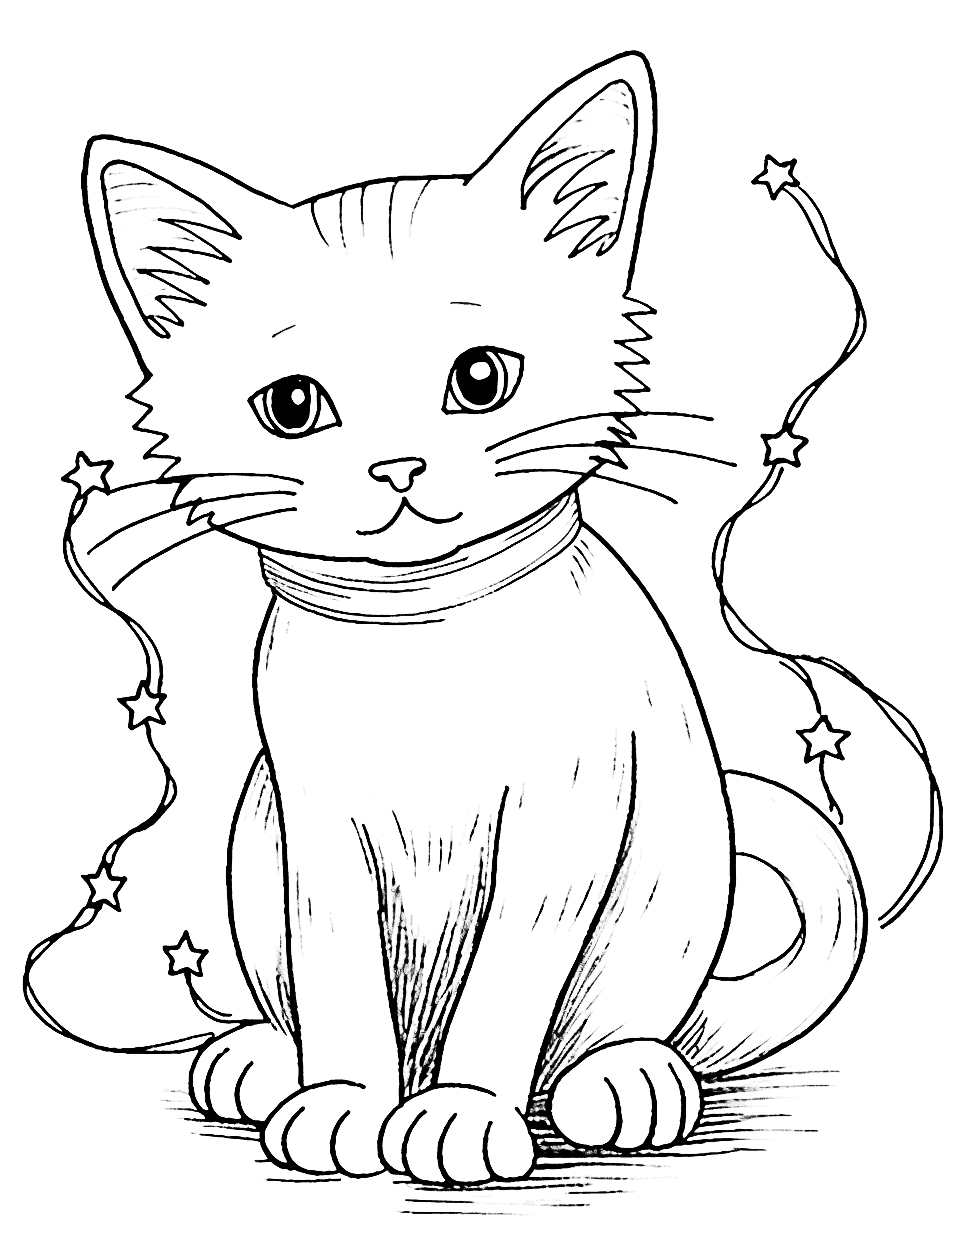 Christmas Cat Wrapped in Lights Coloring Page - A mischievous cat tangled in a string of Christmas lights.